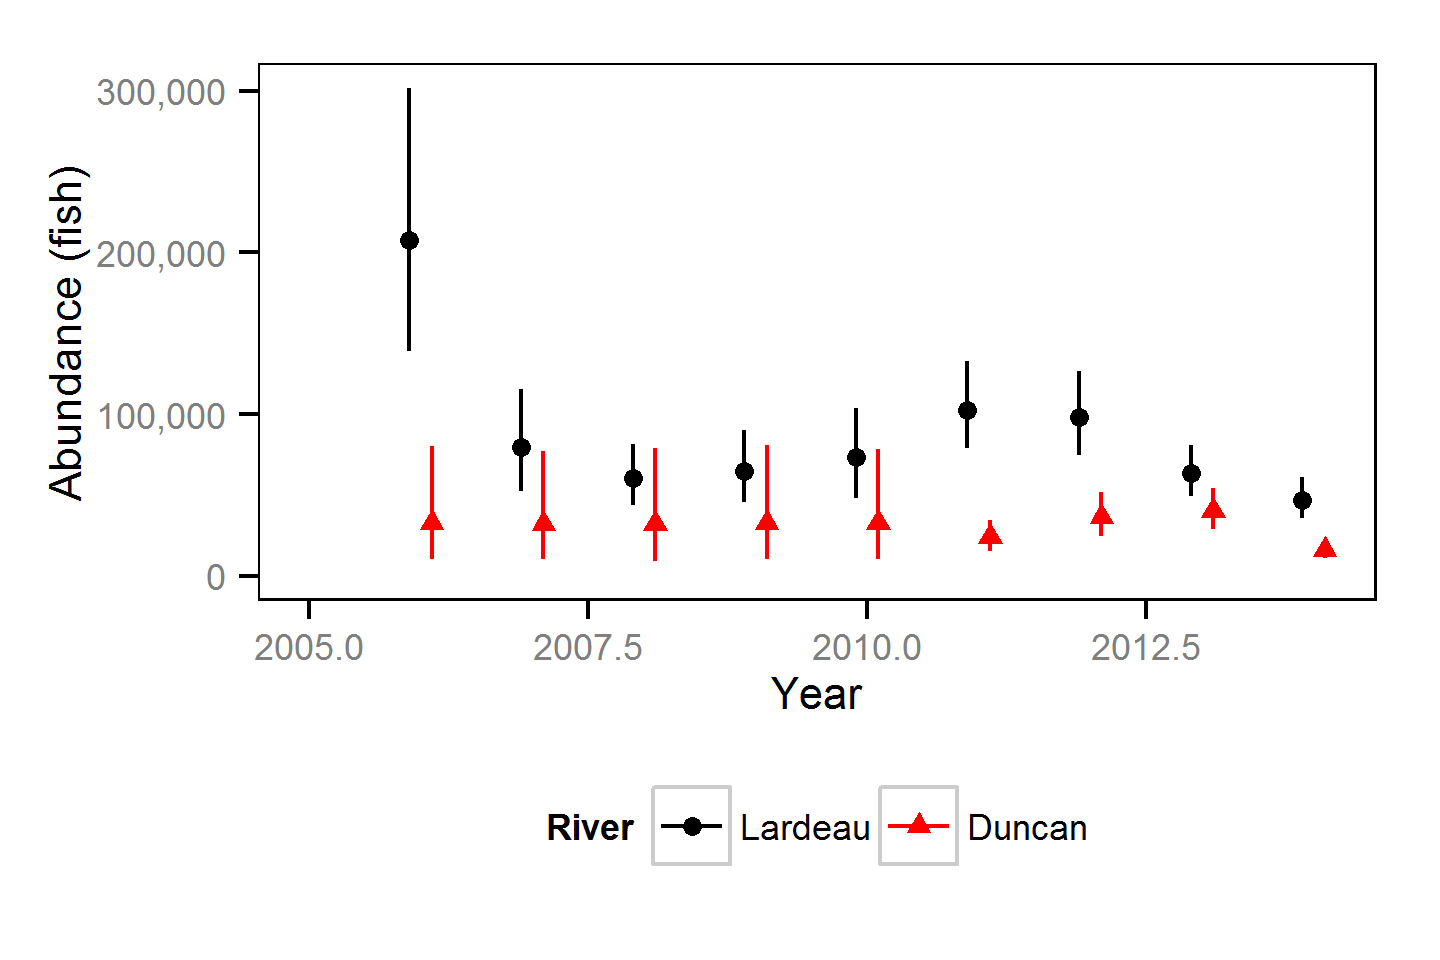 figures/count/Age-1/abundance_river_year.png